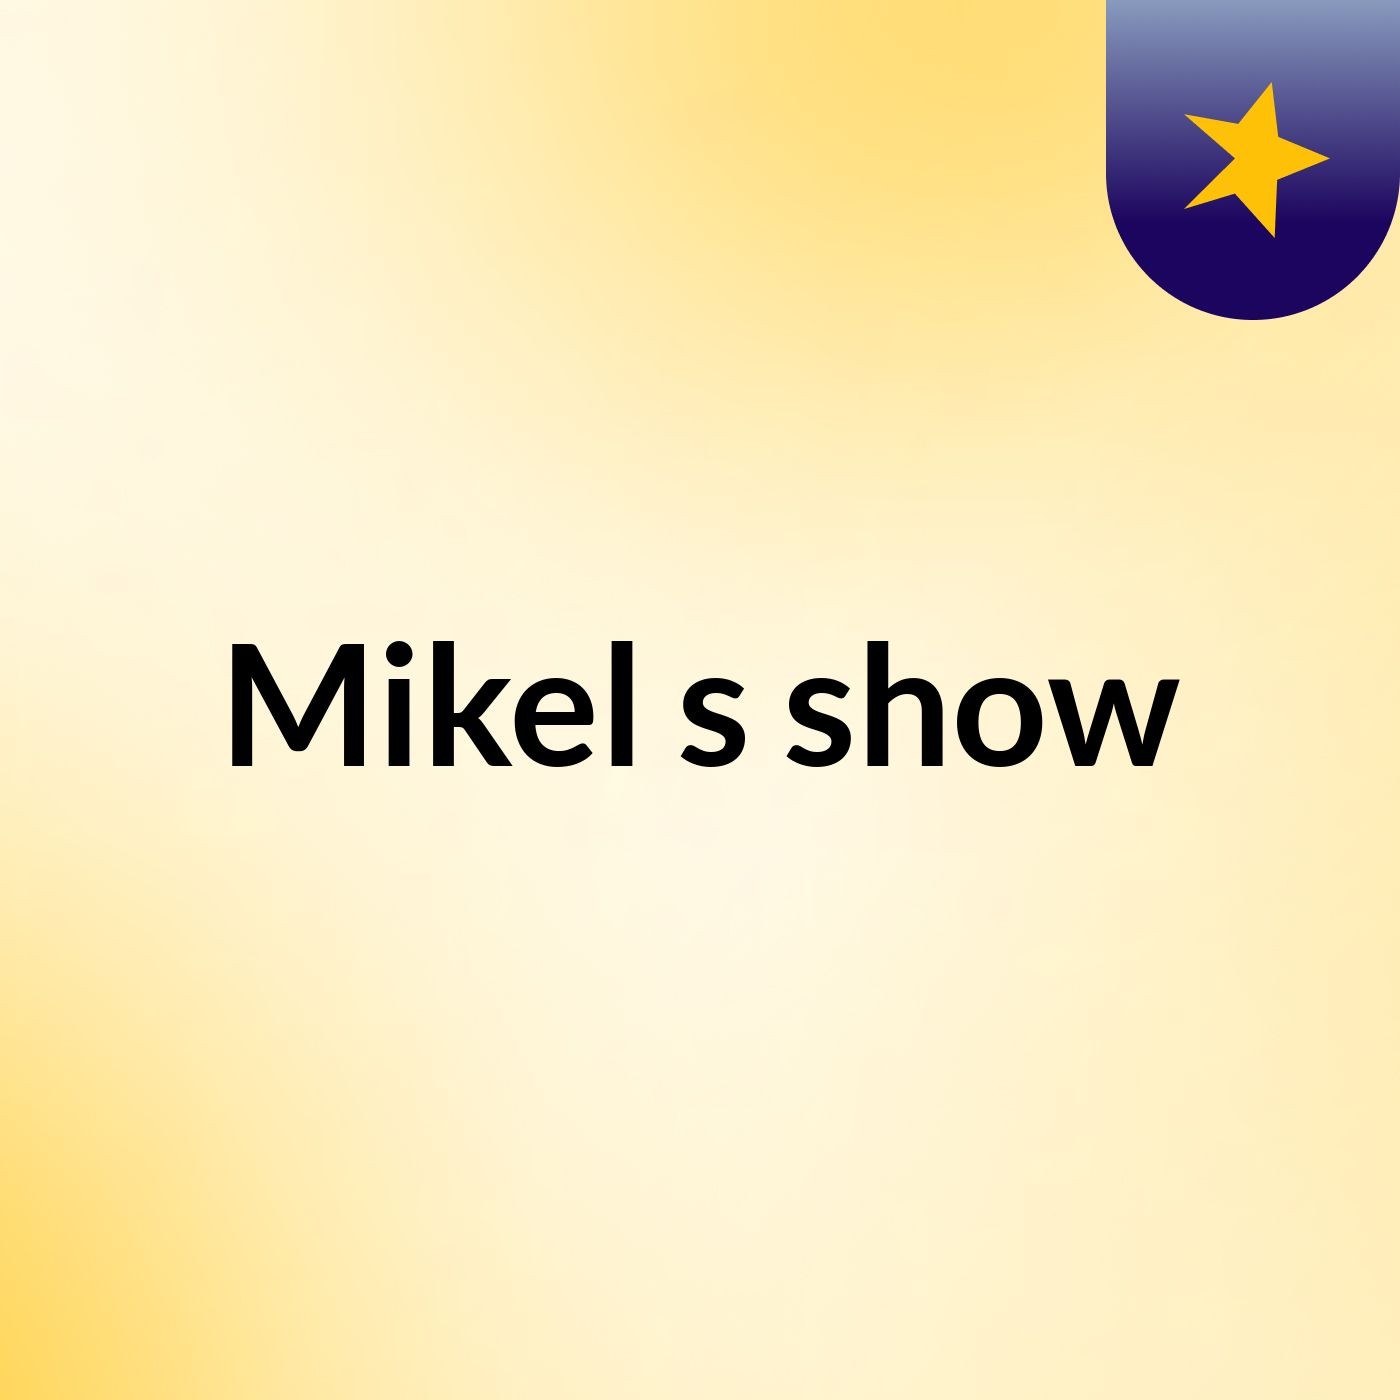 Mikel's show